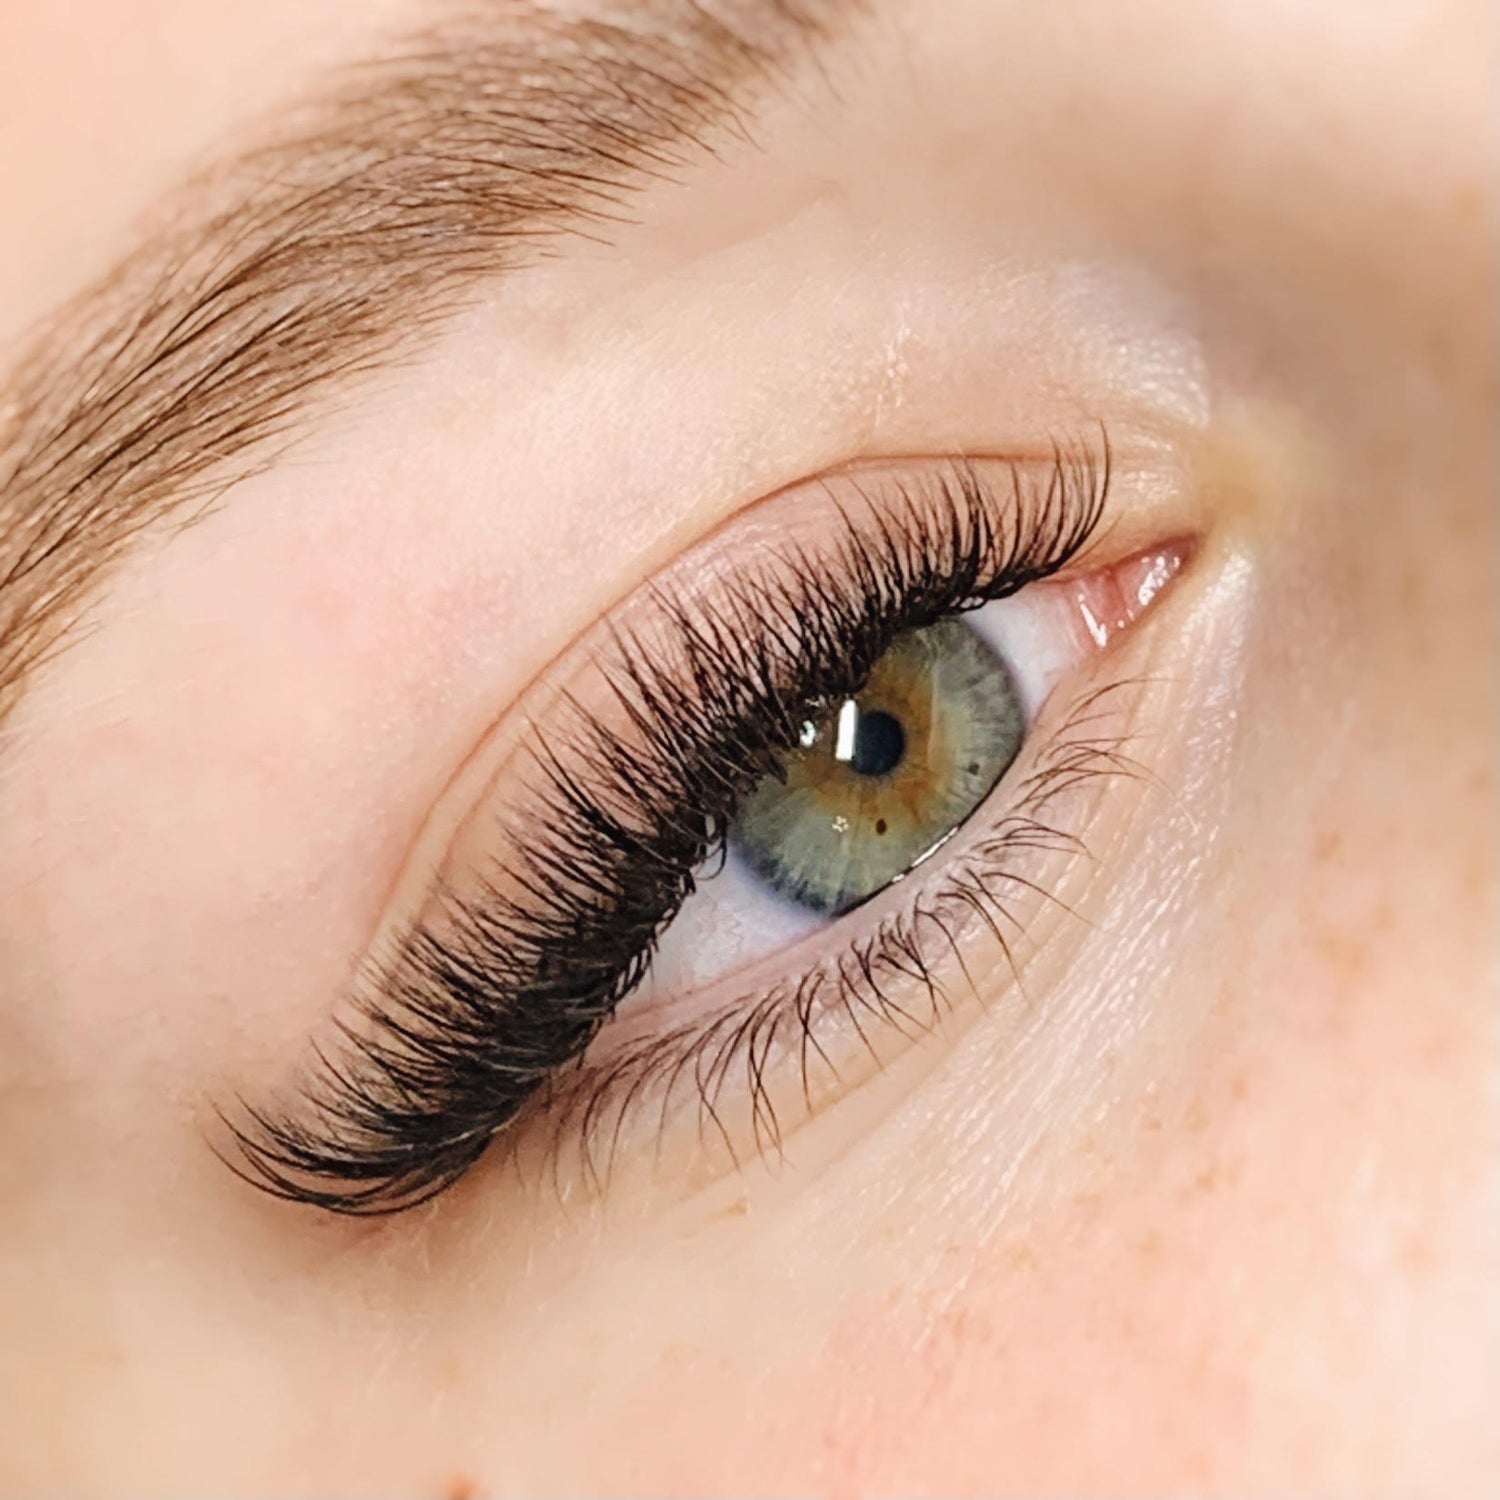 Hybrid eyelash extensions on a woman with blue eyes. The eyelashes are full and of varying lengths.The photo shows very good technique, with no big gaps, clumps, or stickies.  